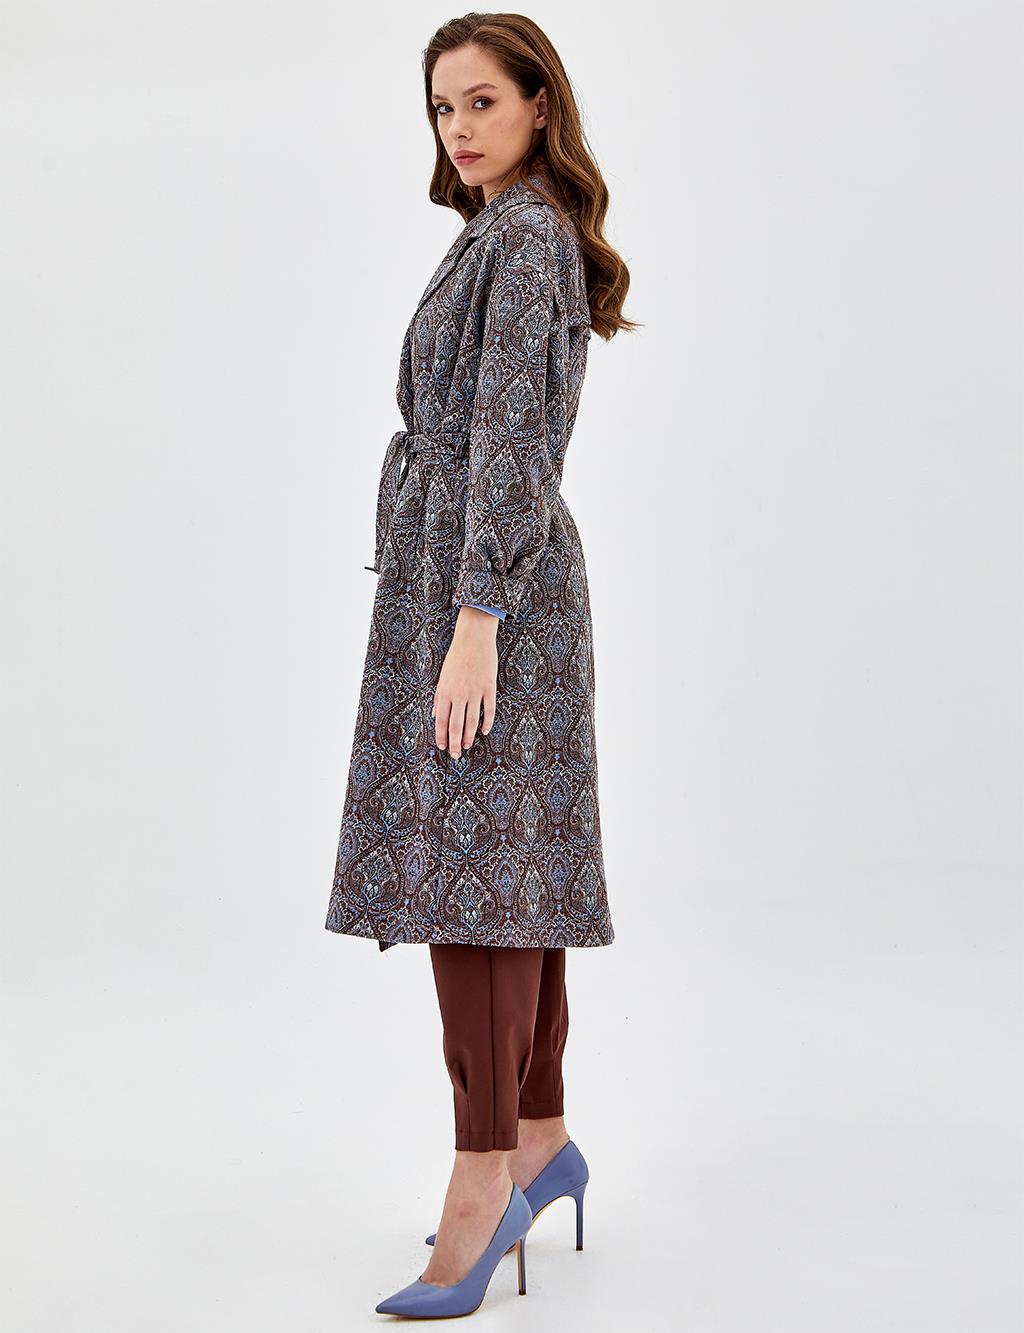 Ethnic Patterned Trench Coat Sky Blue